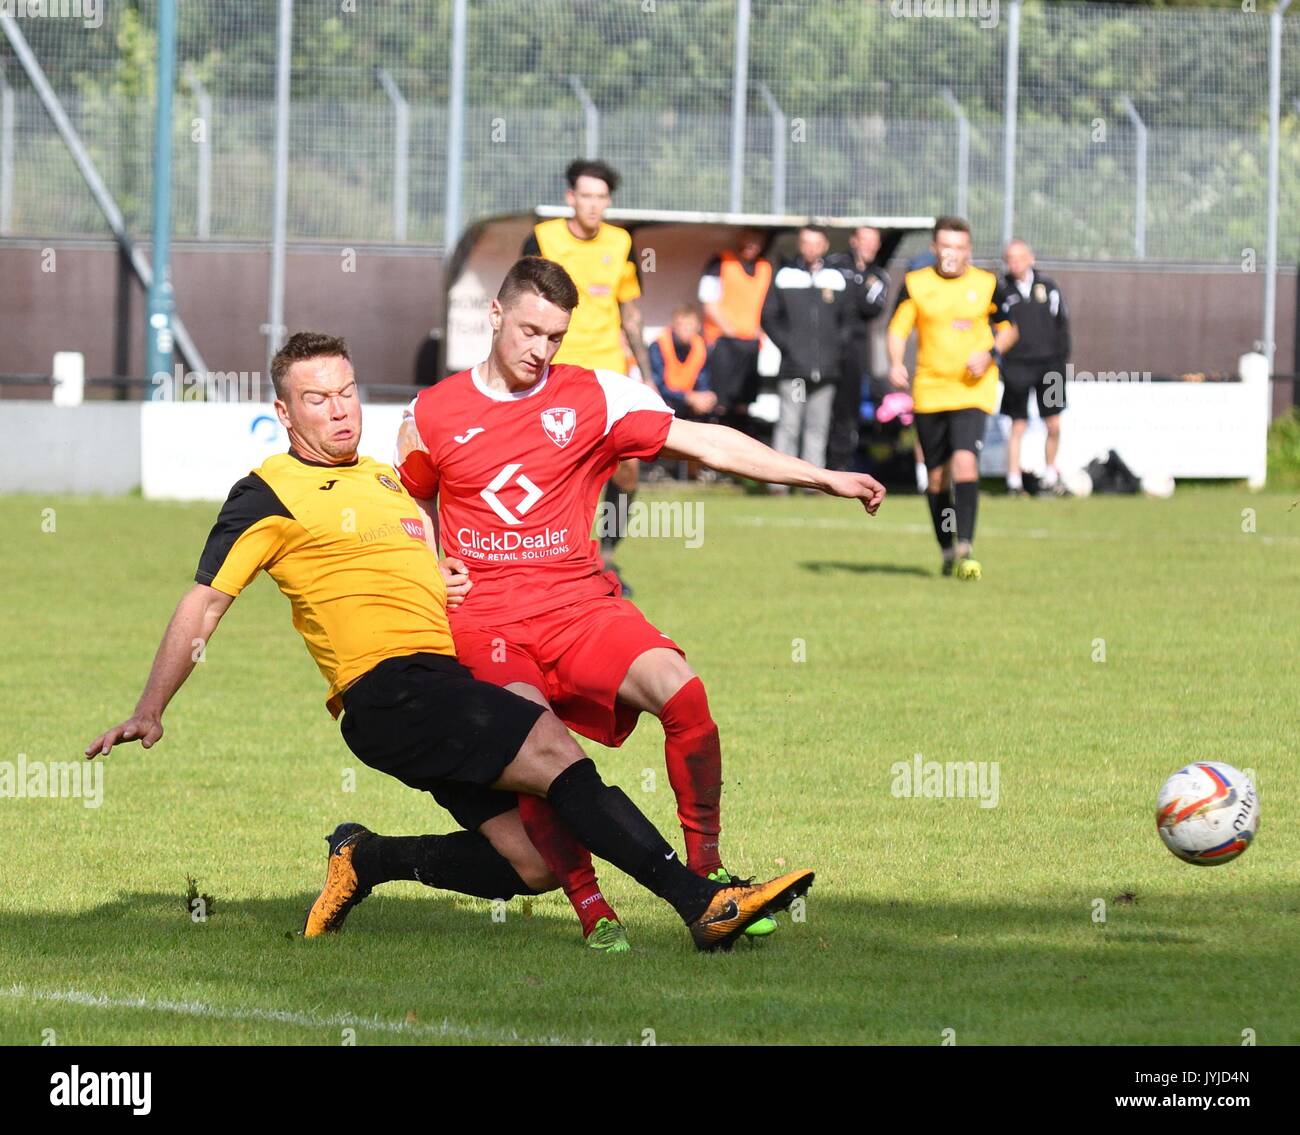 Football action at a non-league match between New Mills and Eccleshall (NOT Eccleshaw) Stock Photo